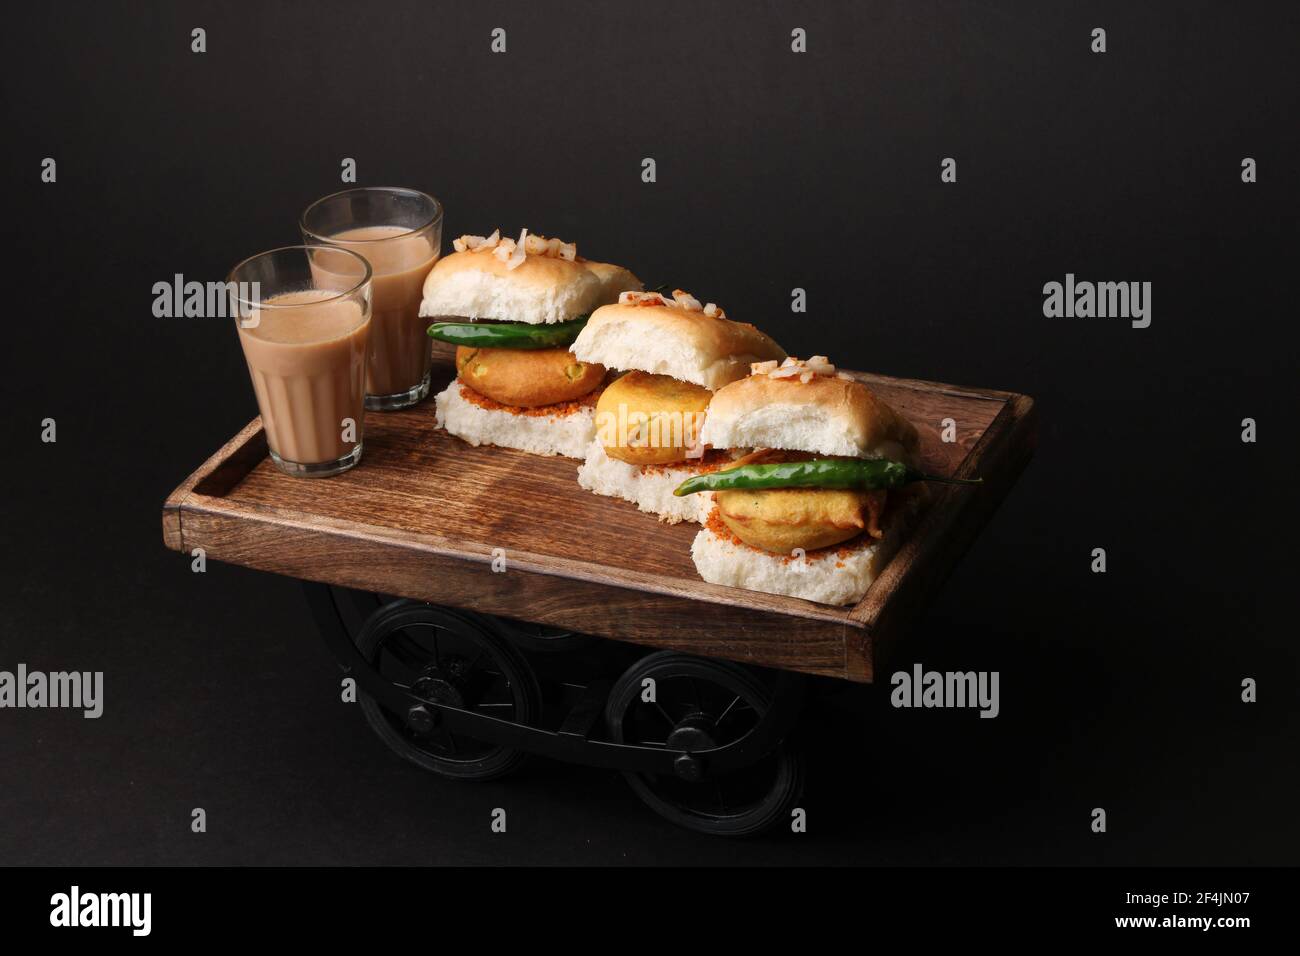 Bombay vada paav is an indian burger. Potato patty is deep fried in gram flour or besan batter and it is served hot with paav or bun like sandwich. It Stock Photo